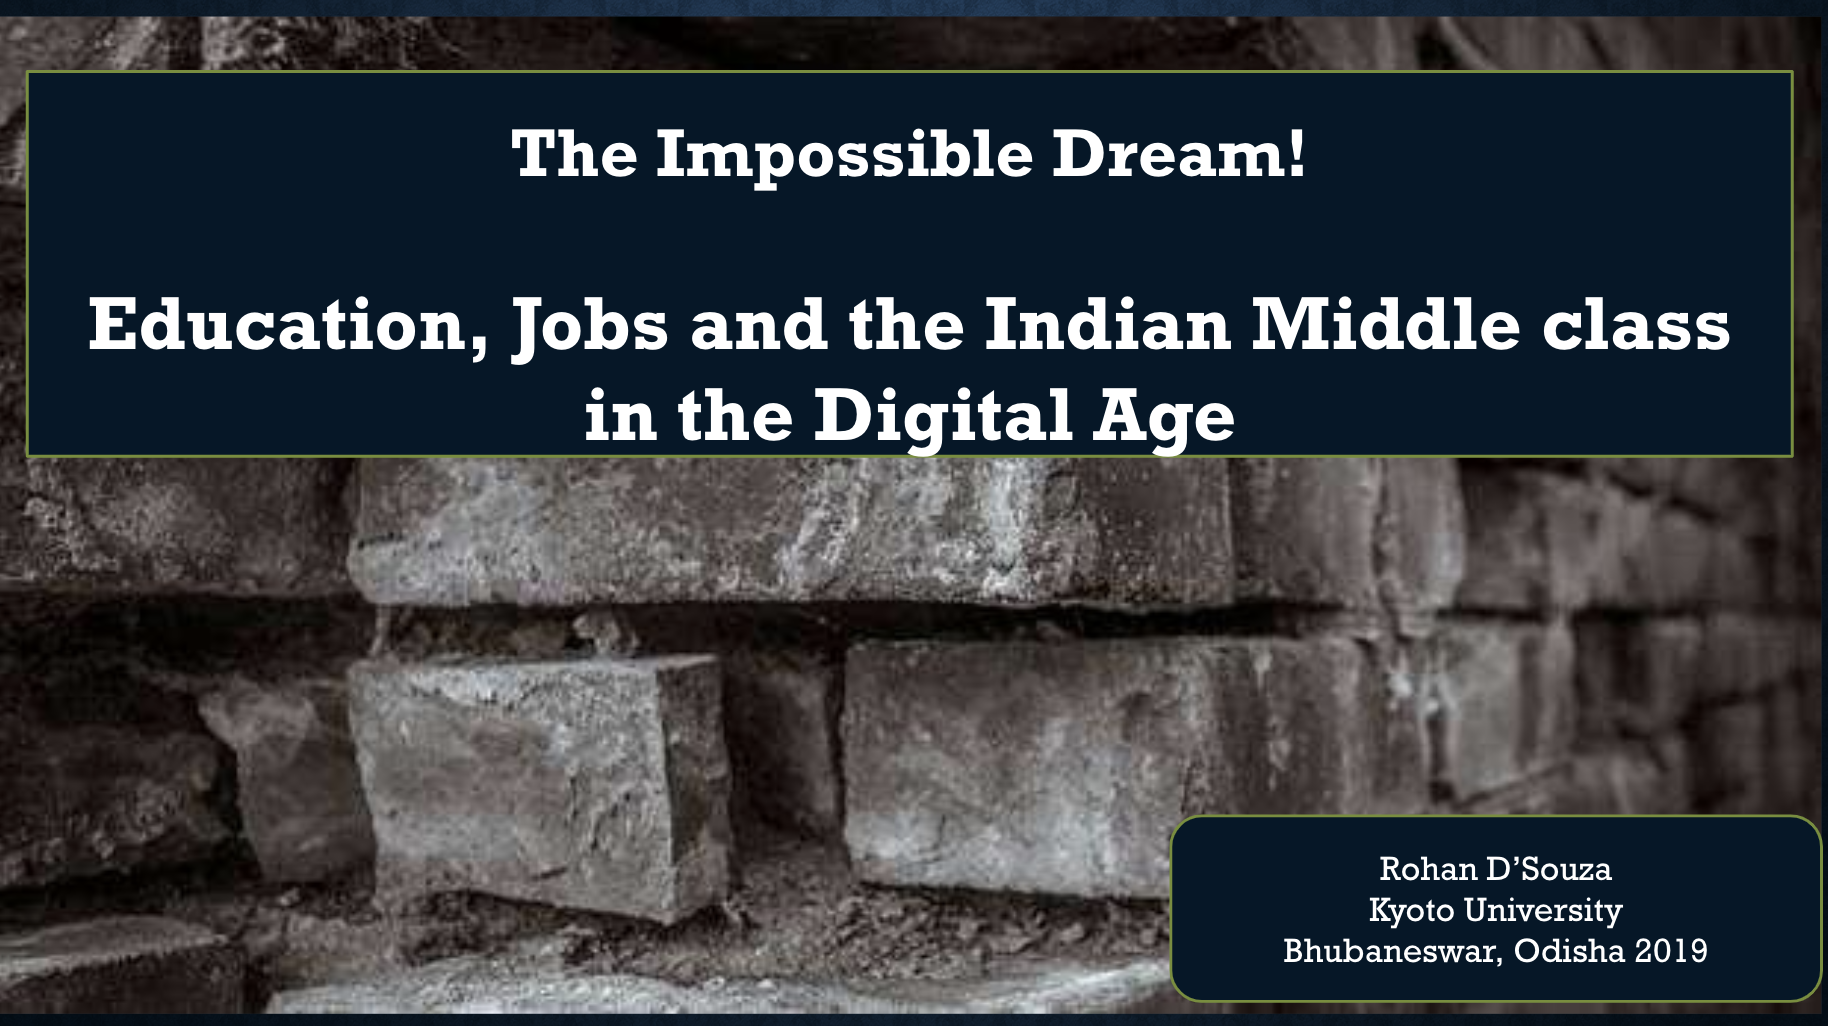 The Impossible Dream! Education, Jobs and the Indian Middle class in the Digital Age by Rohan D’Souza, Kyoto University